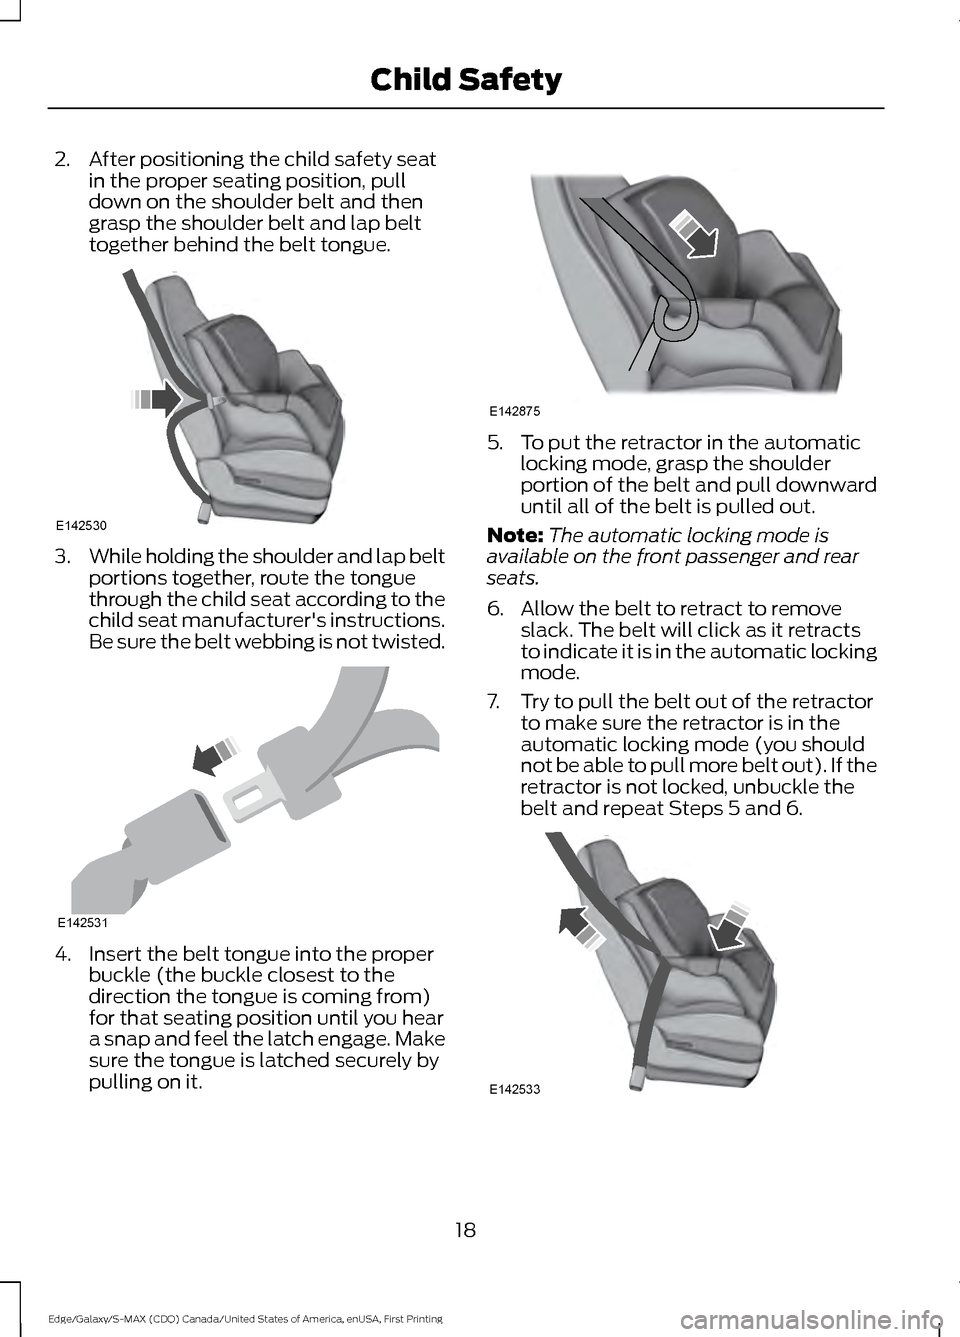 FORD EDGE 2016 2.G Owners Manual 2. After positioning the child safety seat
in the proper seating position, pull
down on the shoulder belt and then
grasp the shoulder belt and lap belt
together behind the belt tongue. 3.
While holdin